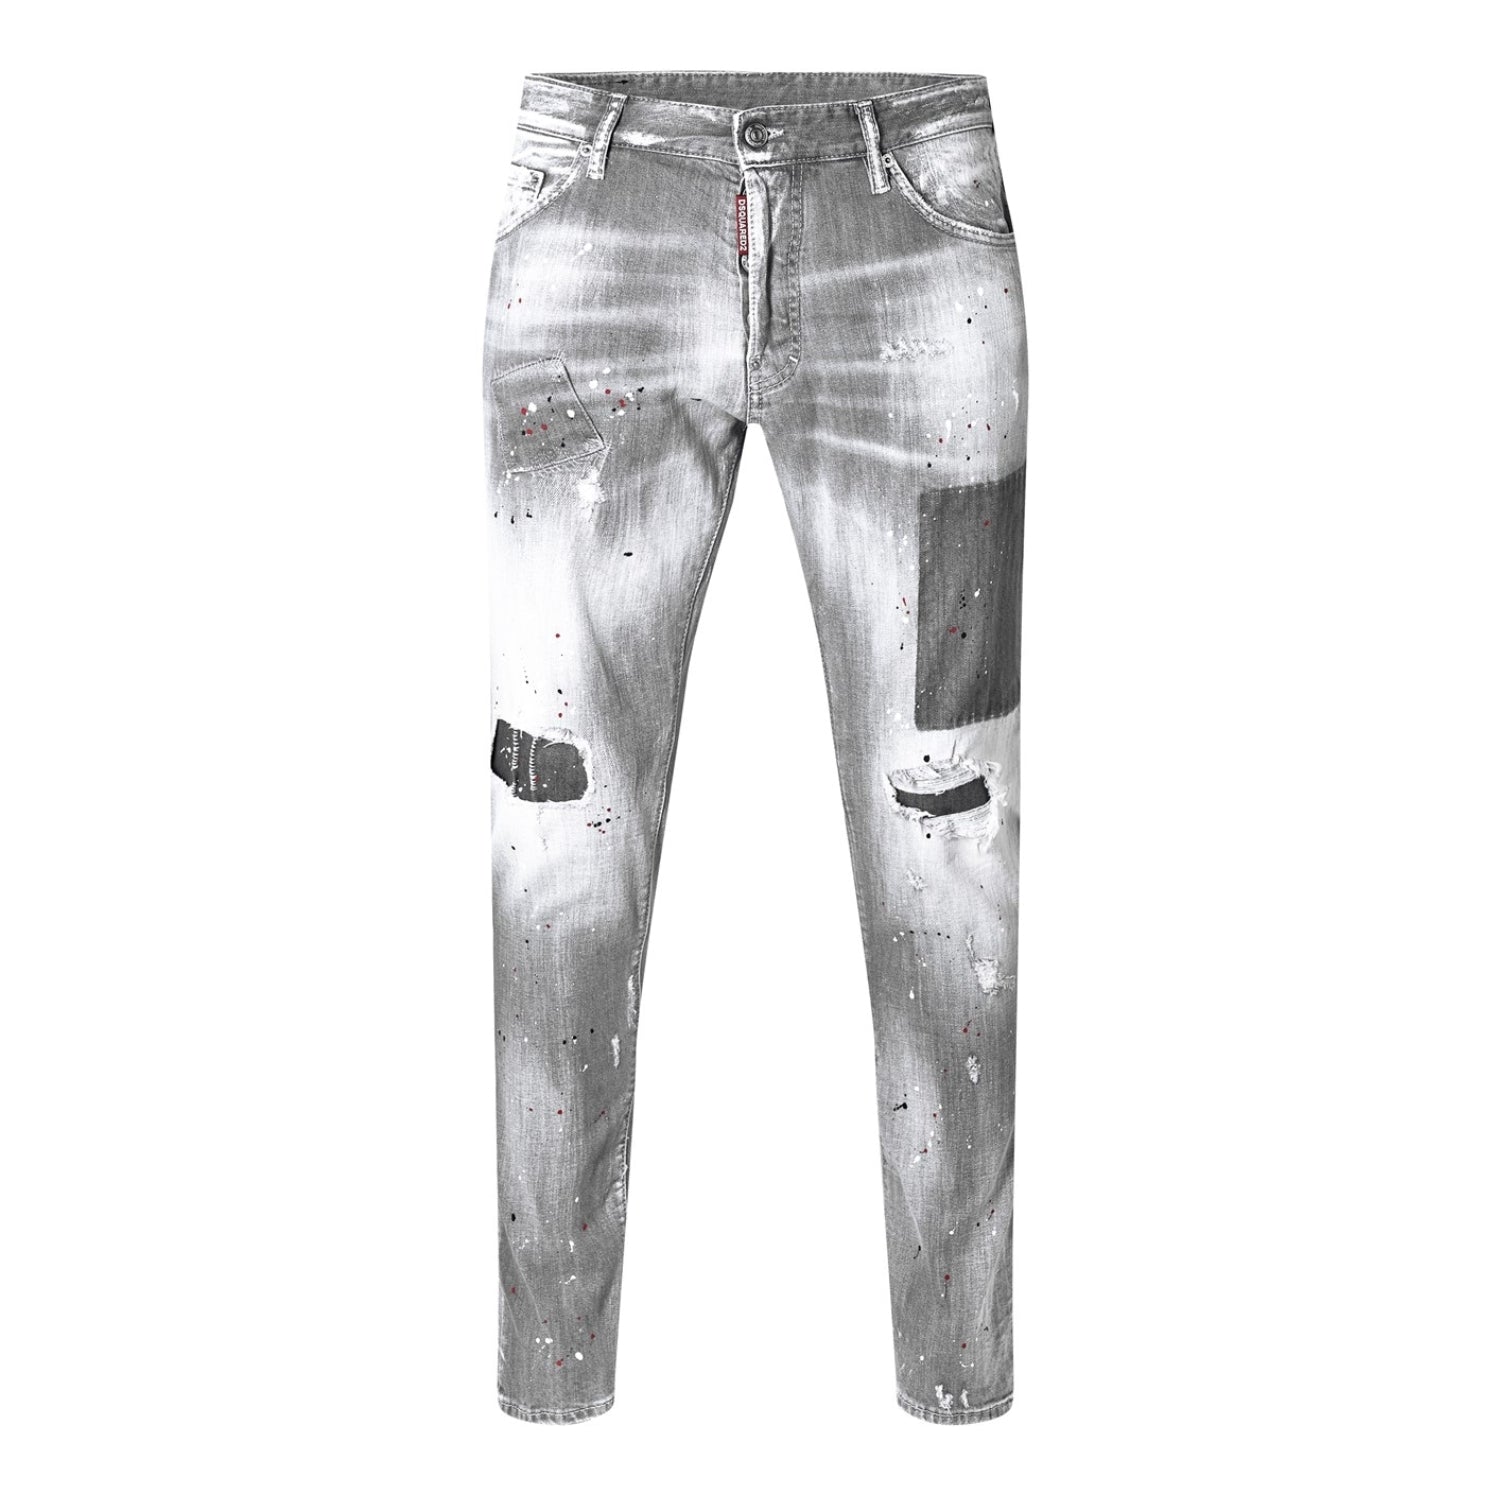 LUXURY HUB DSQUARED2 SURF&FUN COOL GUY JEANS